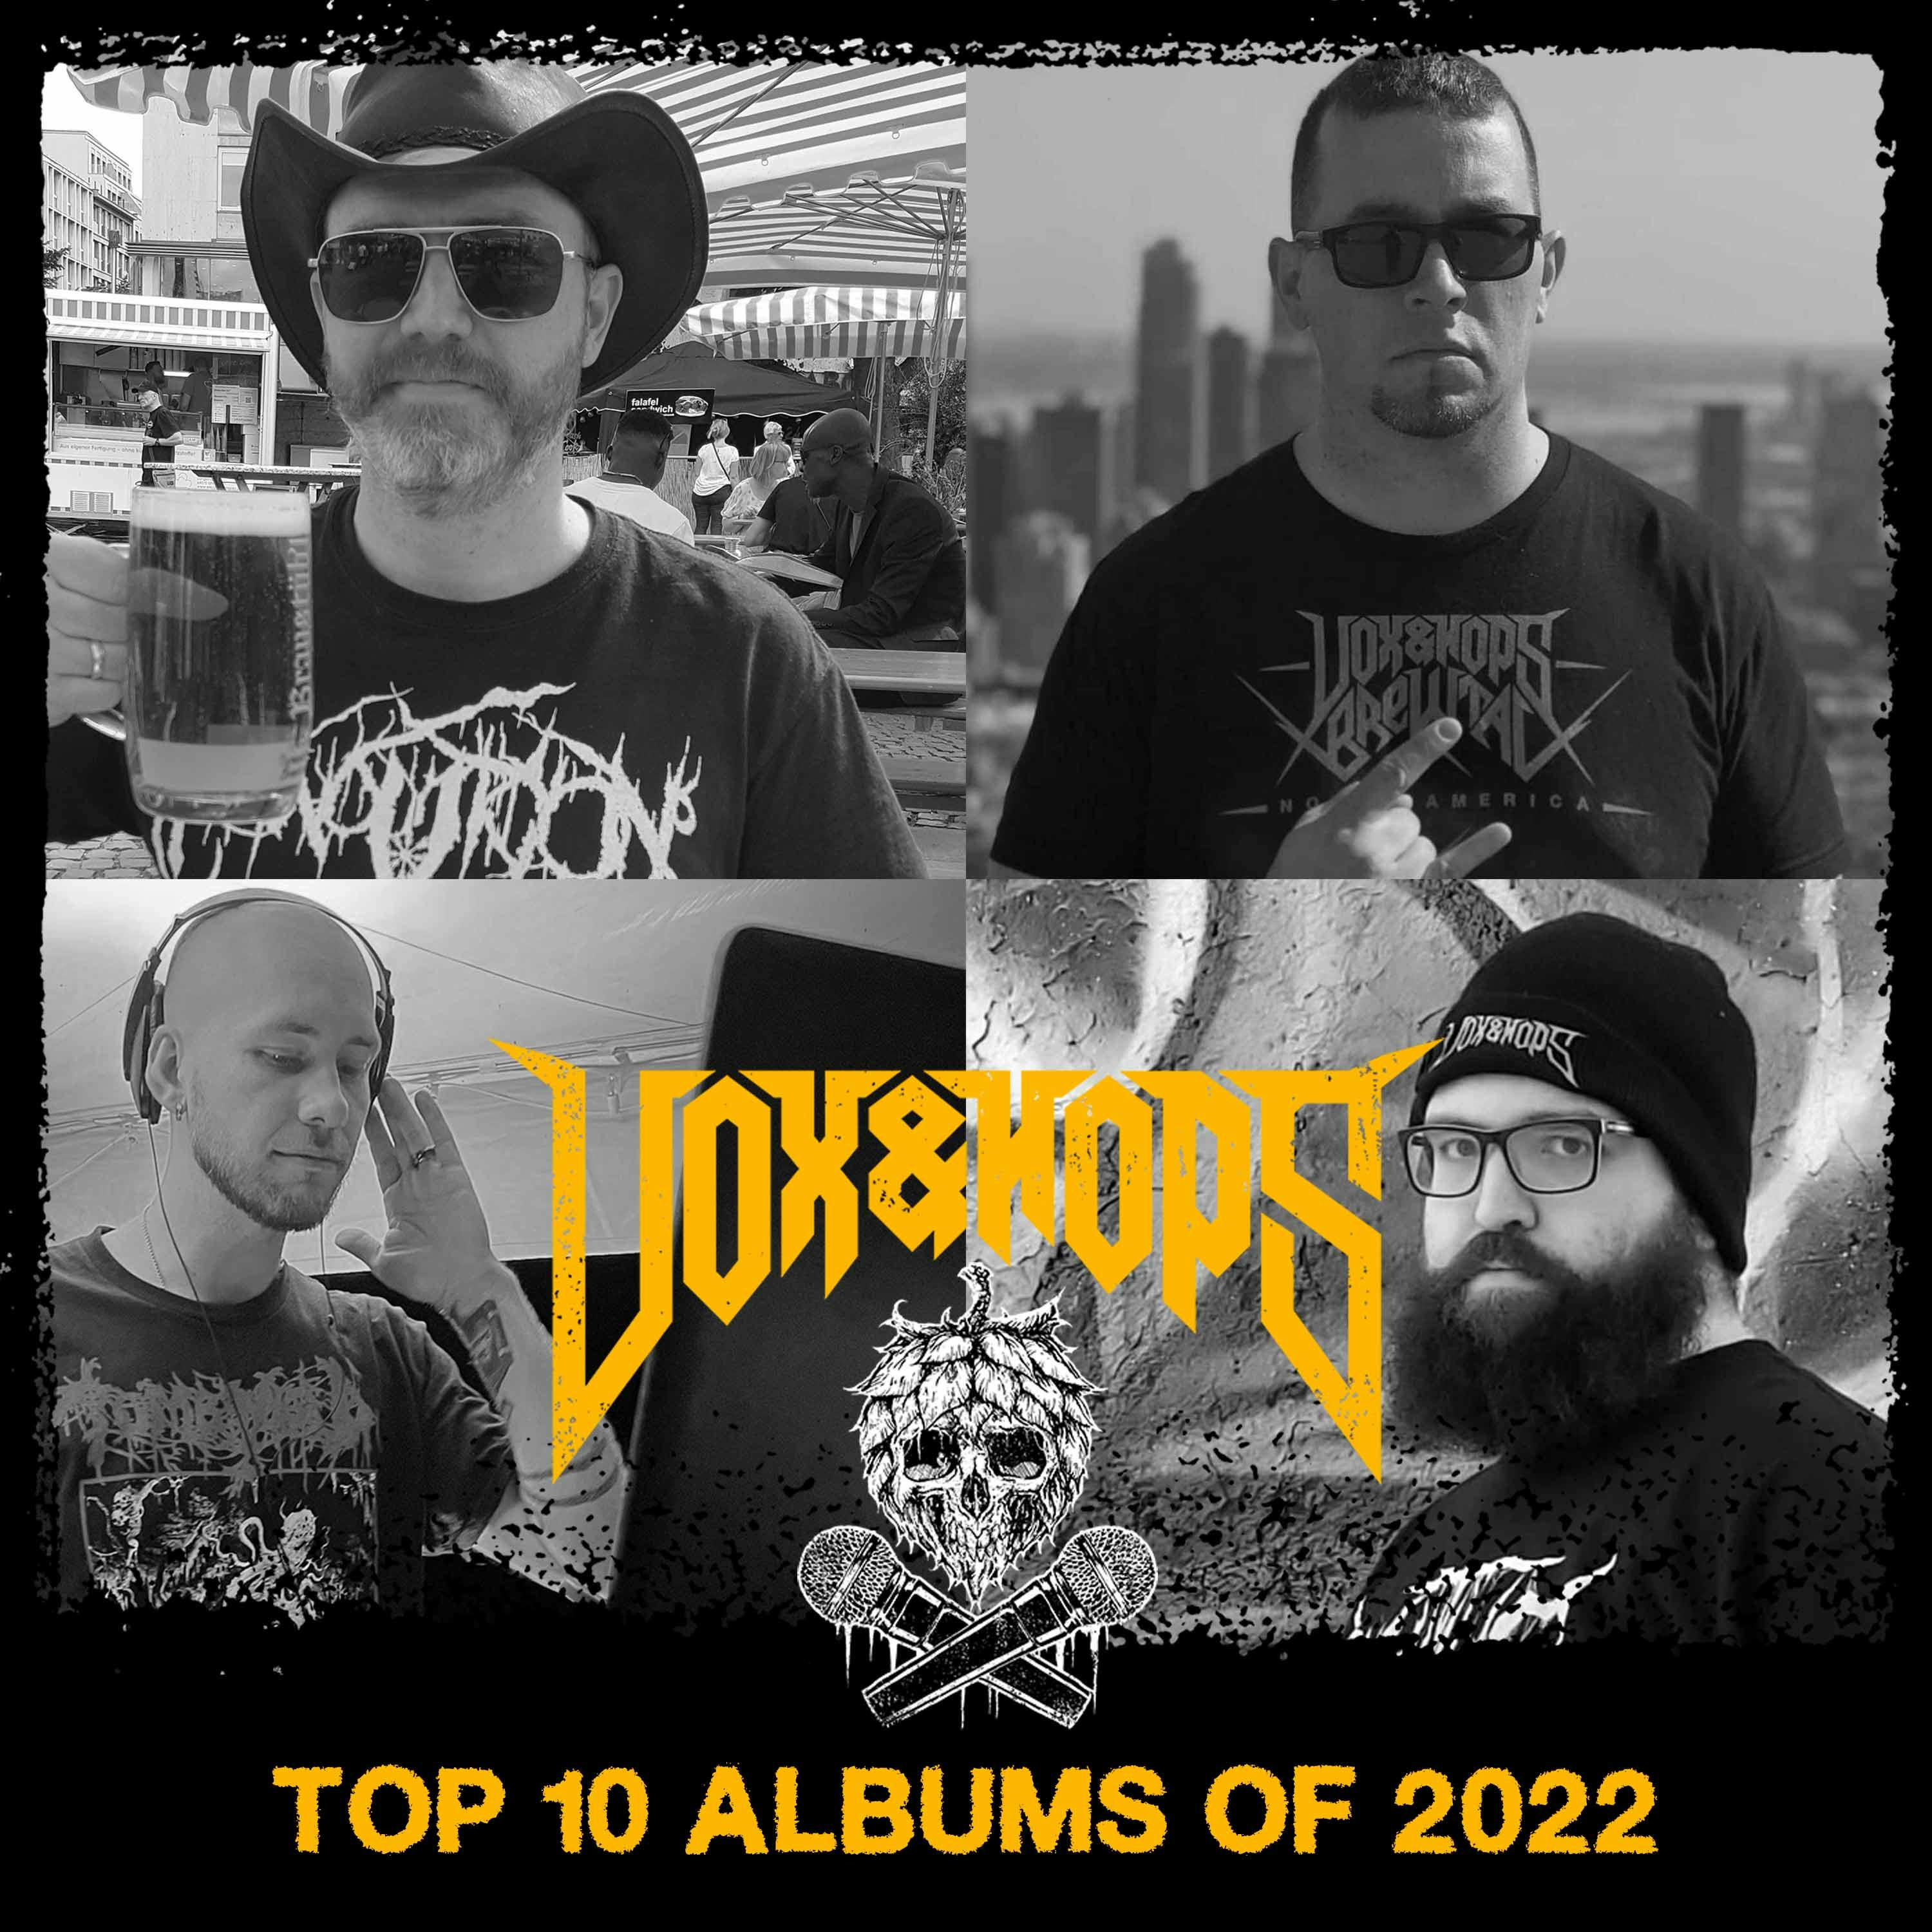 The Top 10 Albums of 2022 with the Vox&Hops Album Review Crew